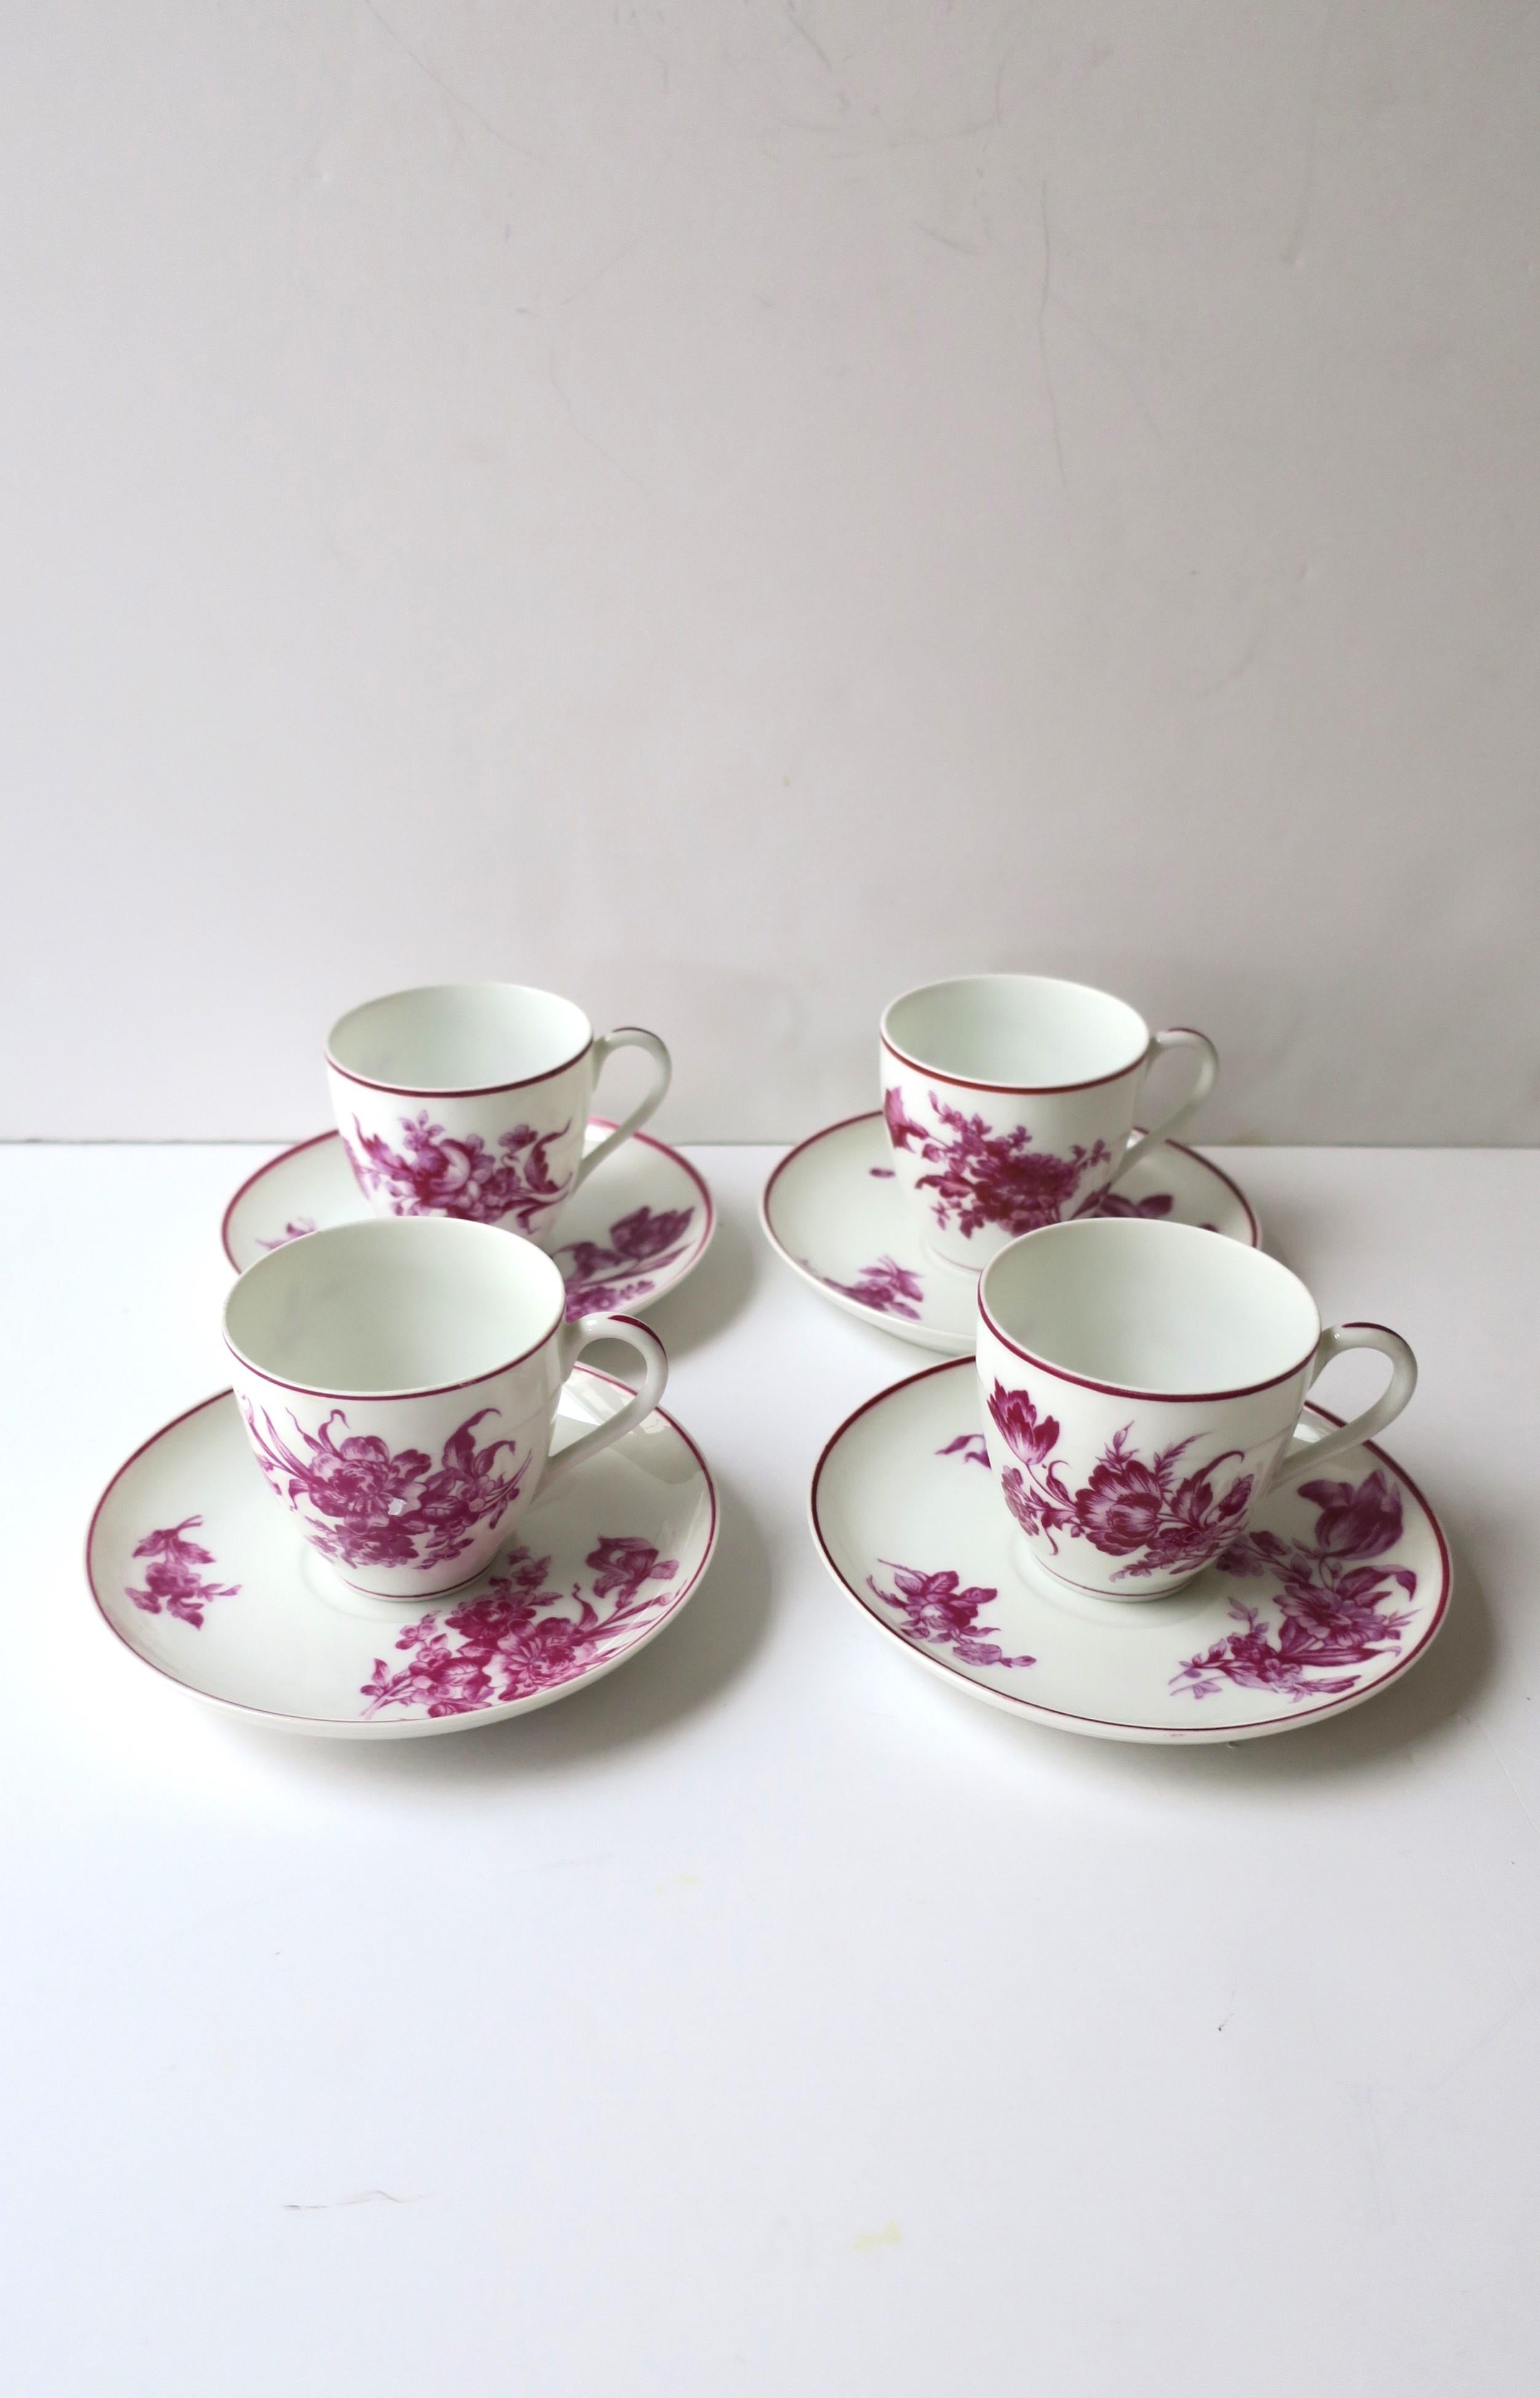 Paris French Porcelain Coffee Espresso or Tea Demitasse Cup & Saucer, Set of 4 In Good Condition For Sale In New York, NY